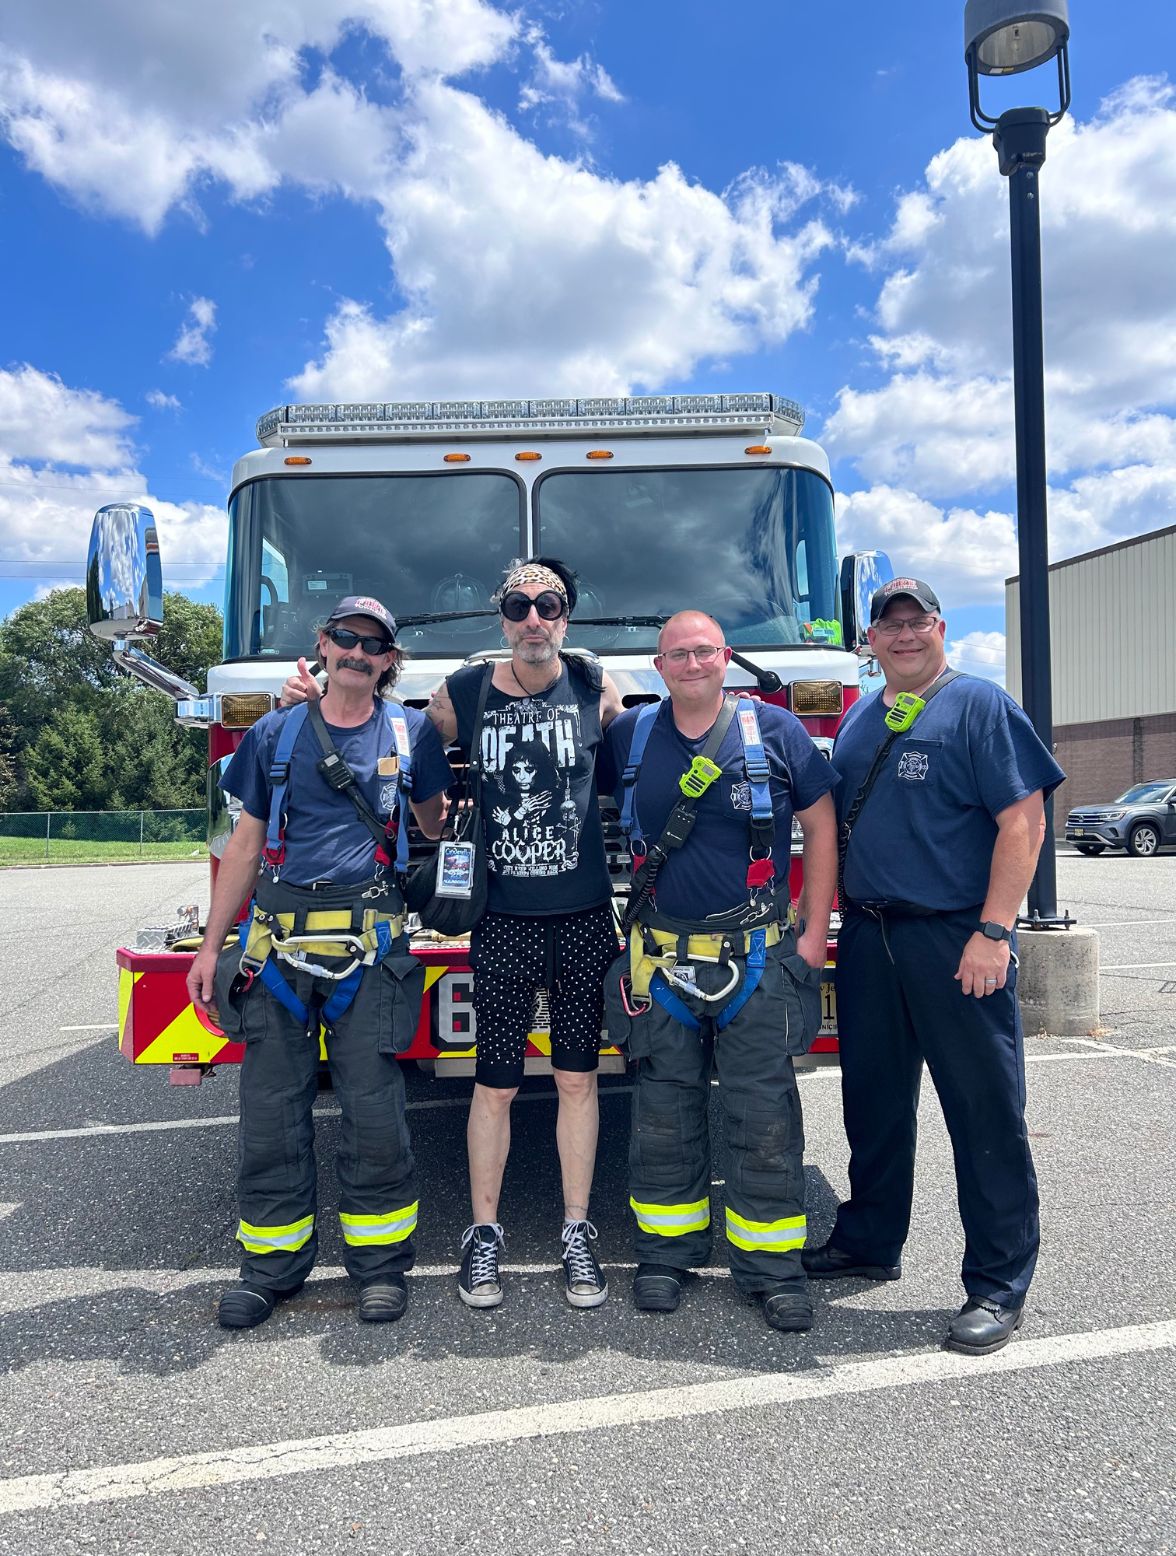 Jacky BamBam standing with three Voorhees fire department firefighters next to their firetruck